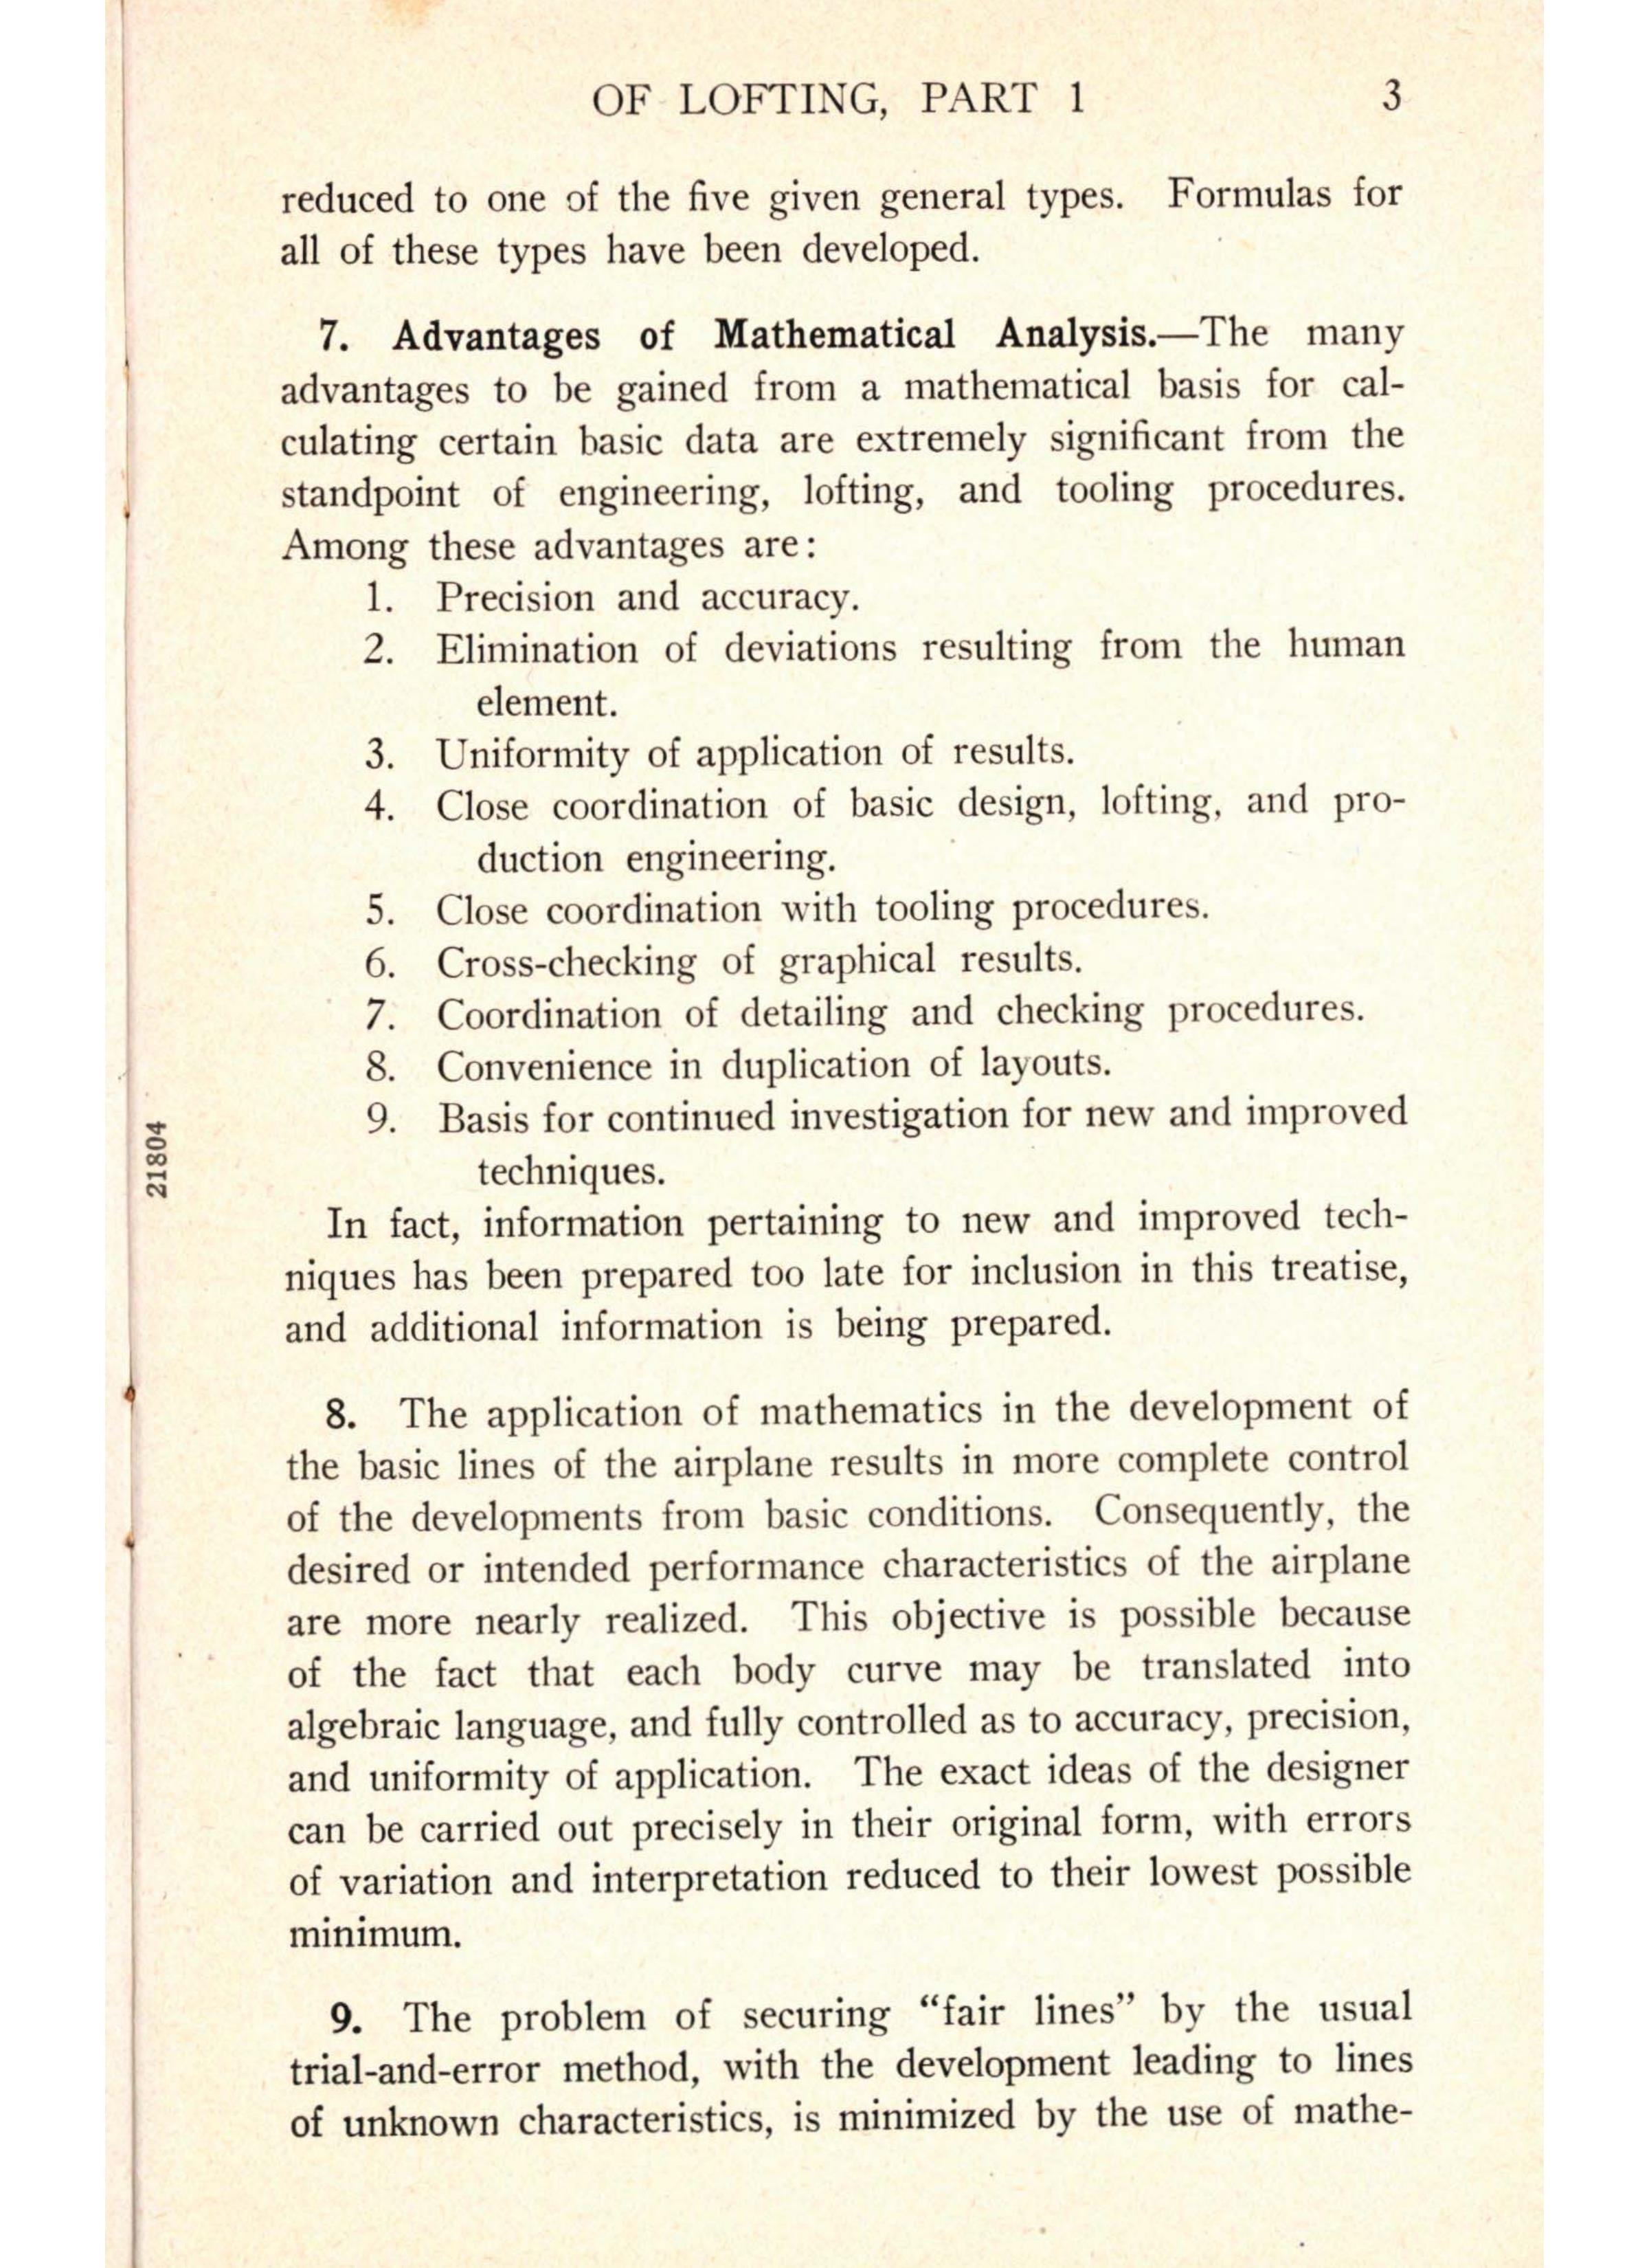 Sample page 5 from AirCorps Library document: Mathmatical Technique of Lofting - Part 1 - Bureau of Aeronautics